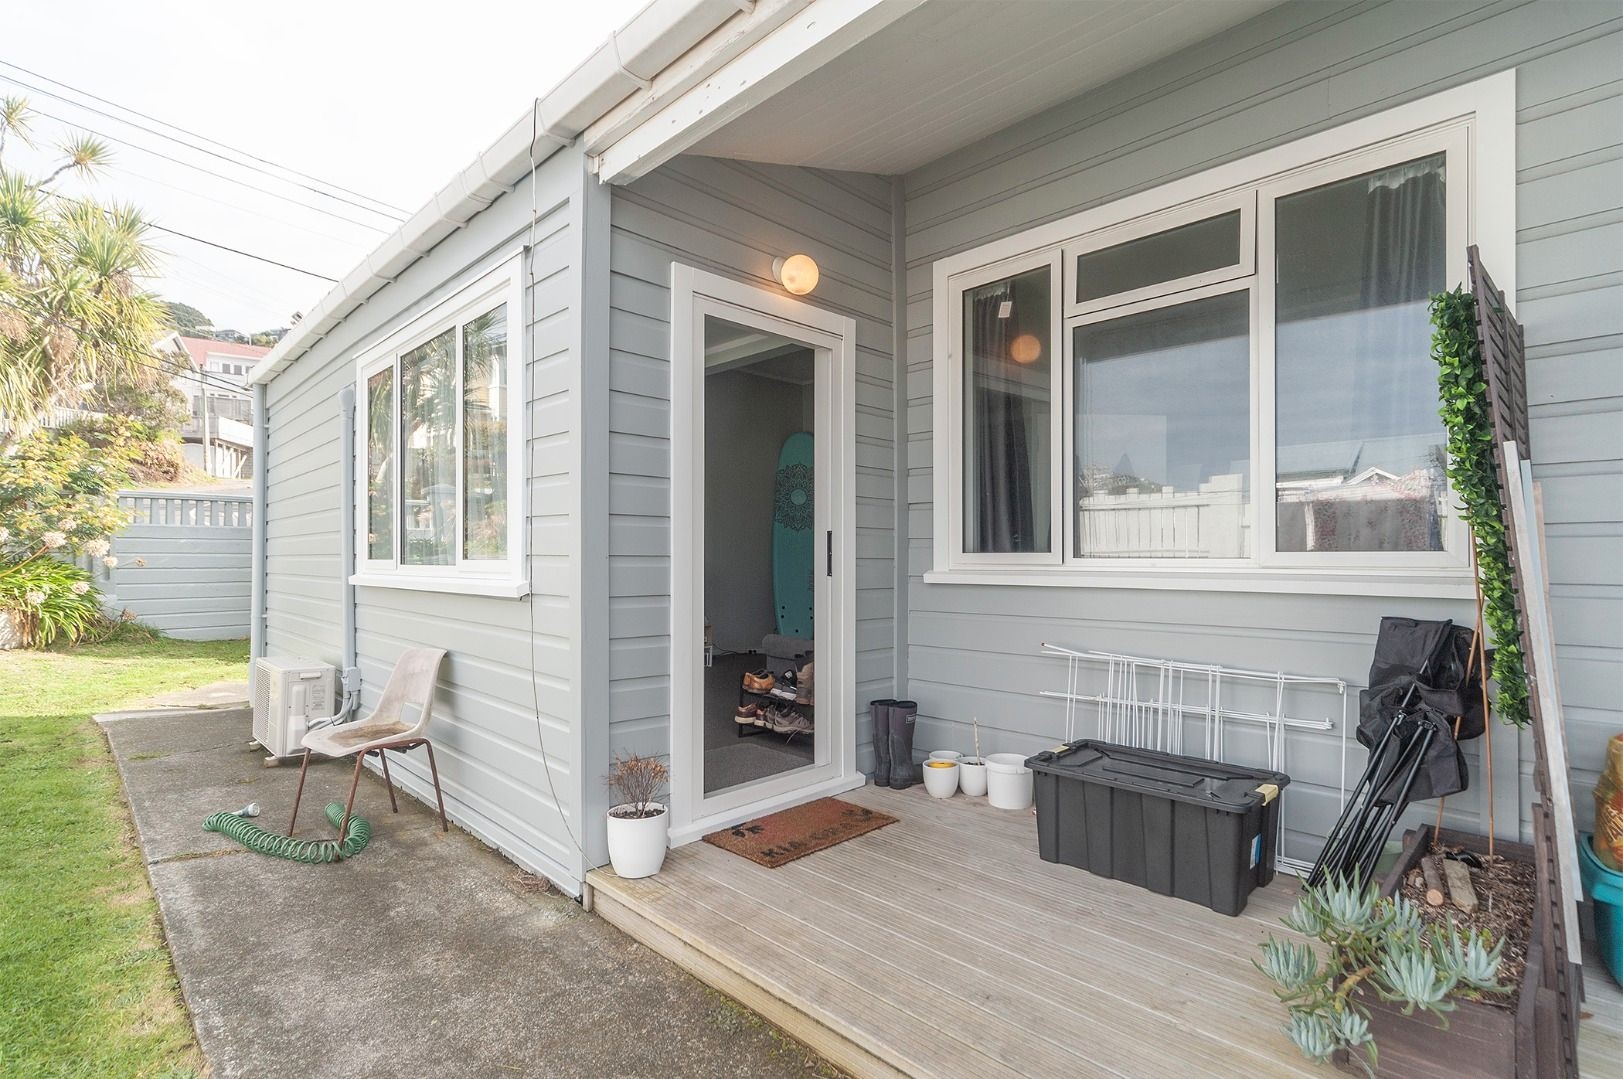 Real Estate For Rent Houses & Apartments : Great Little One Bedroom in Lyall Bay